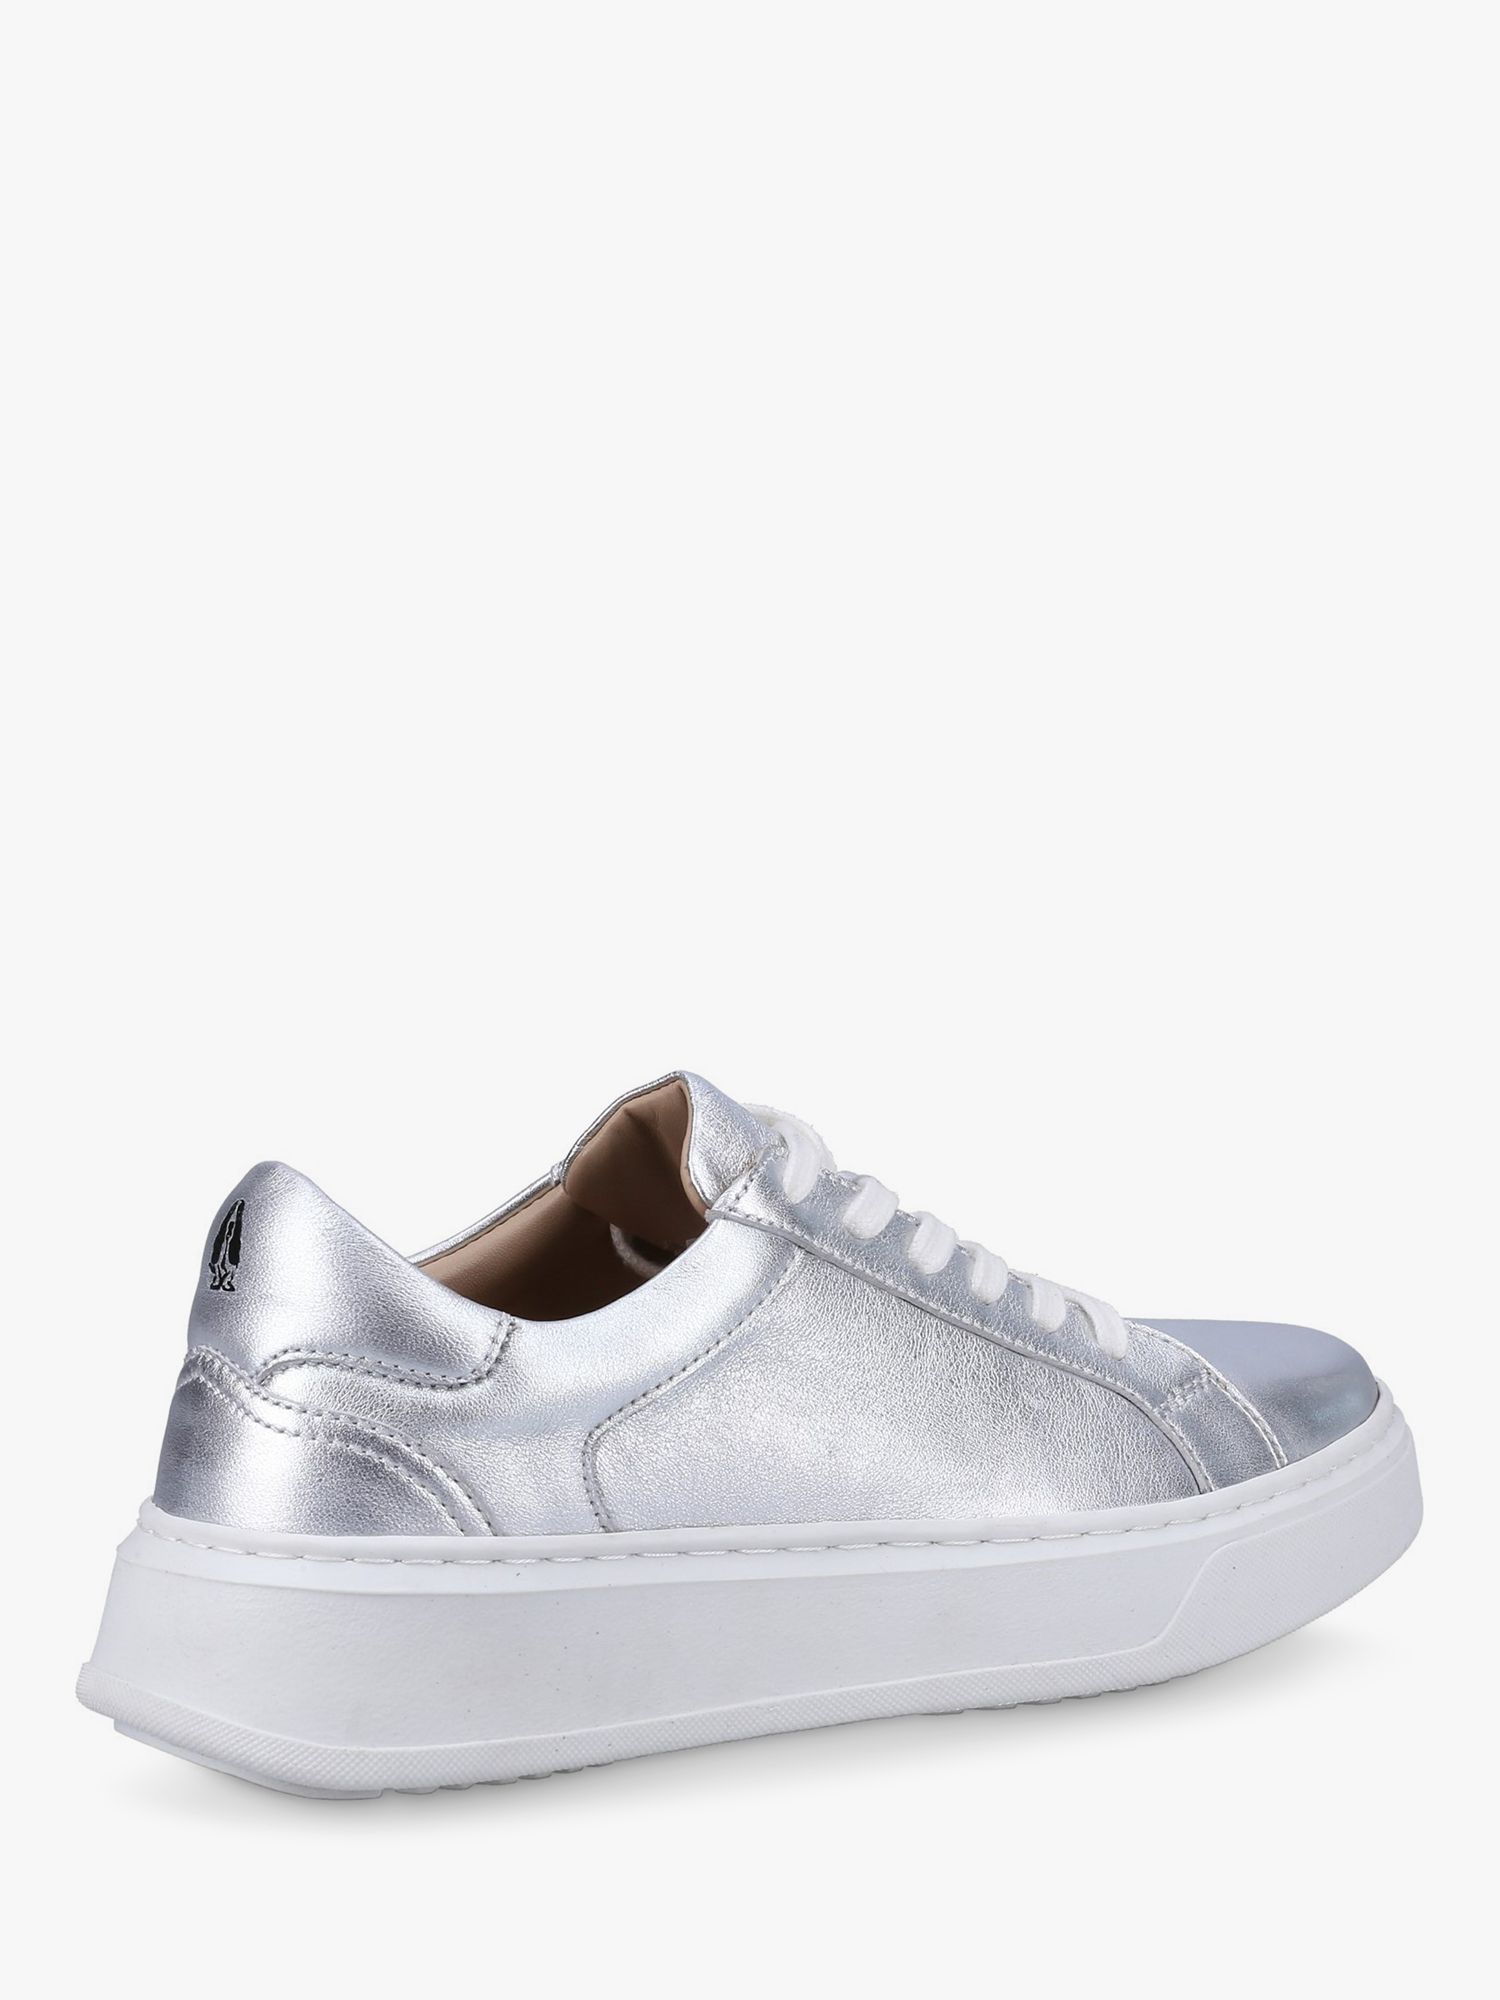 Hush Puppies Camille Lace-Up Leather Trainers, Silver, 3